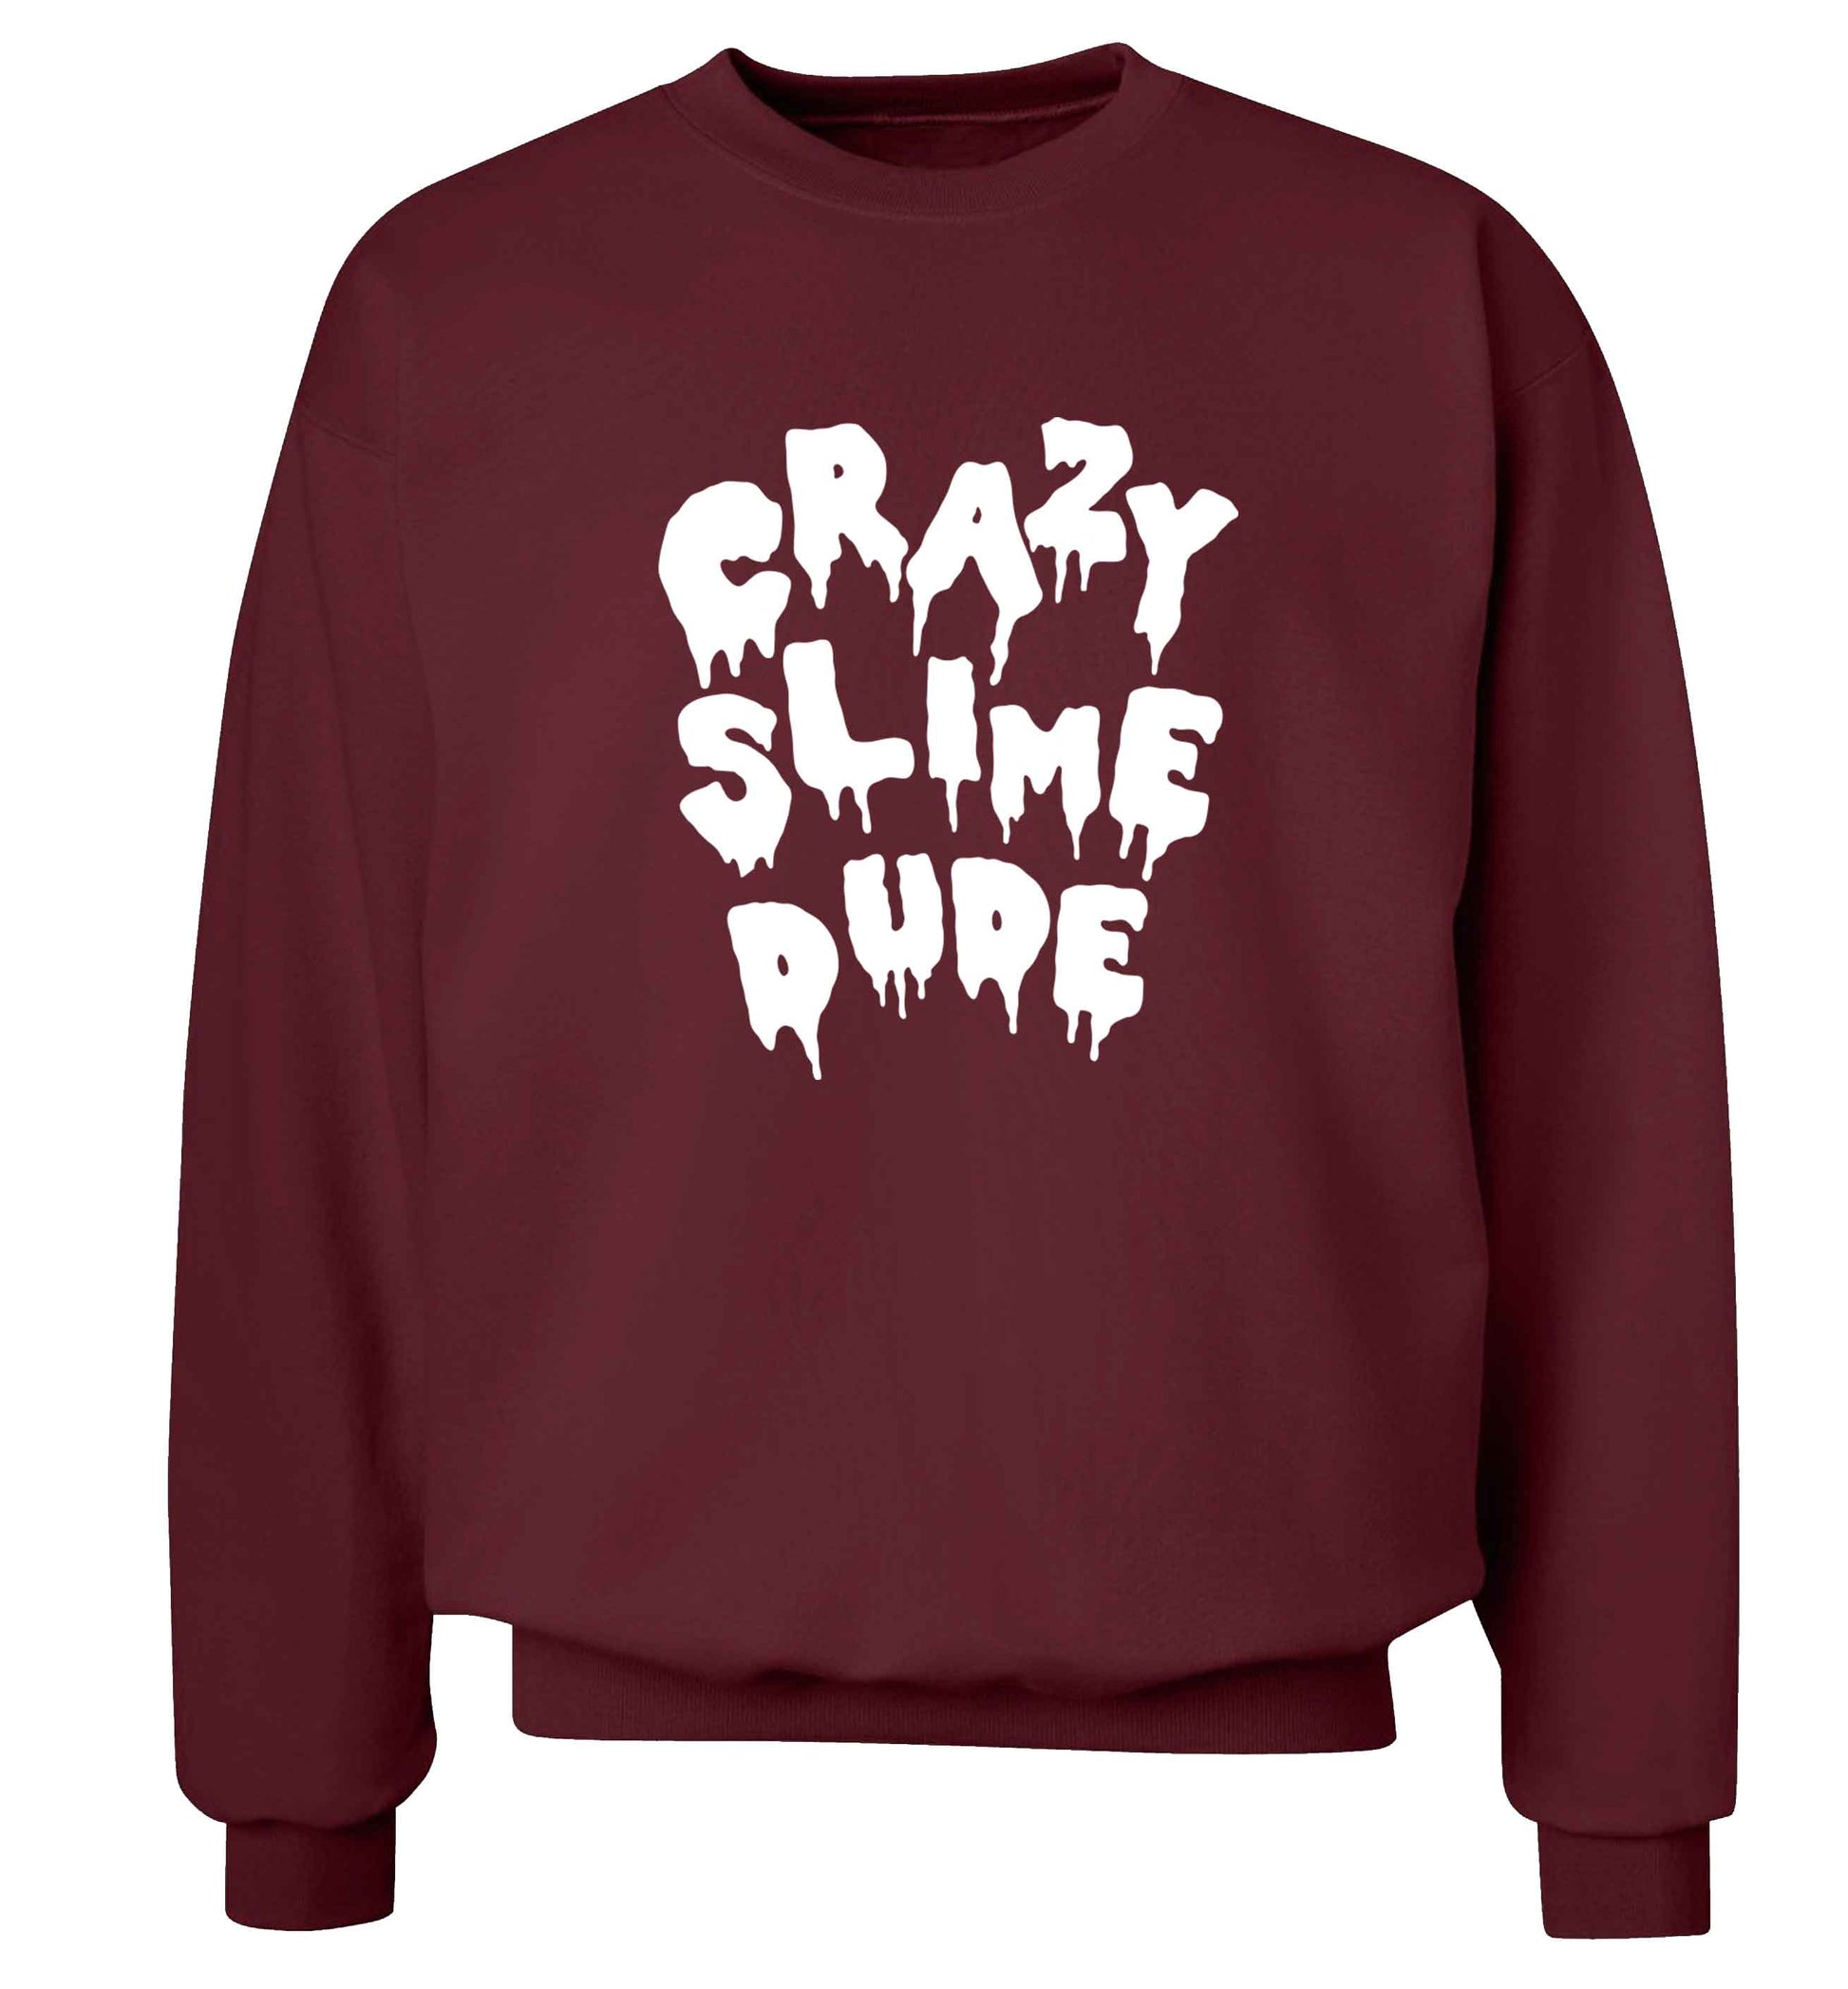 Crazy slime dude adult's unisex maroon sweater 2XL